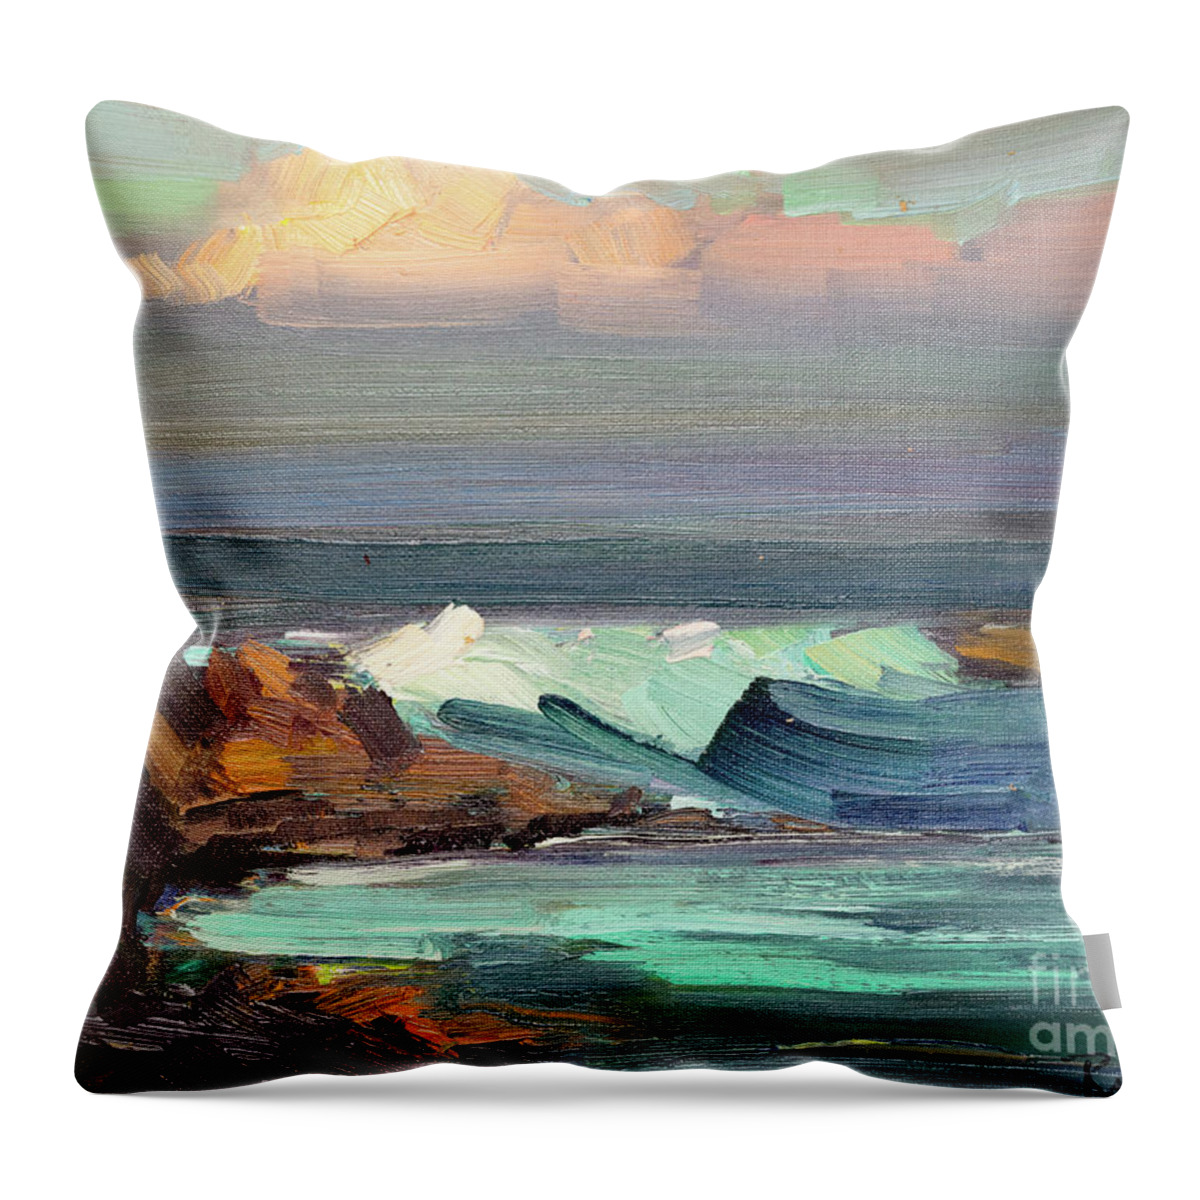 Seascape Throw Pillow featuring the painting Its That One Wave by Radha Rao